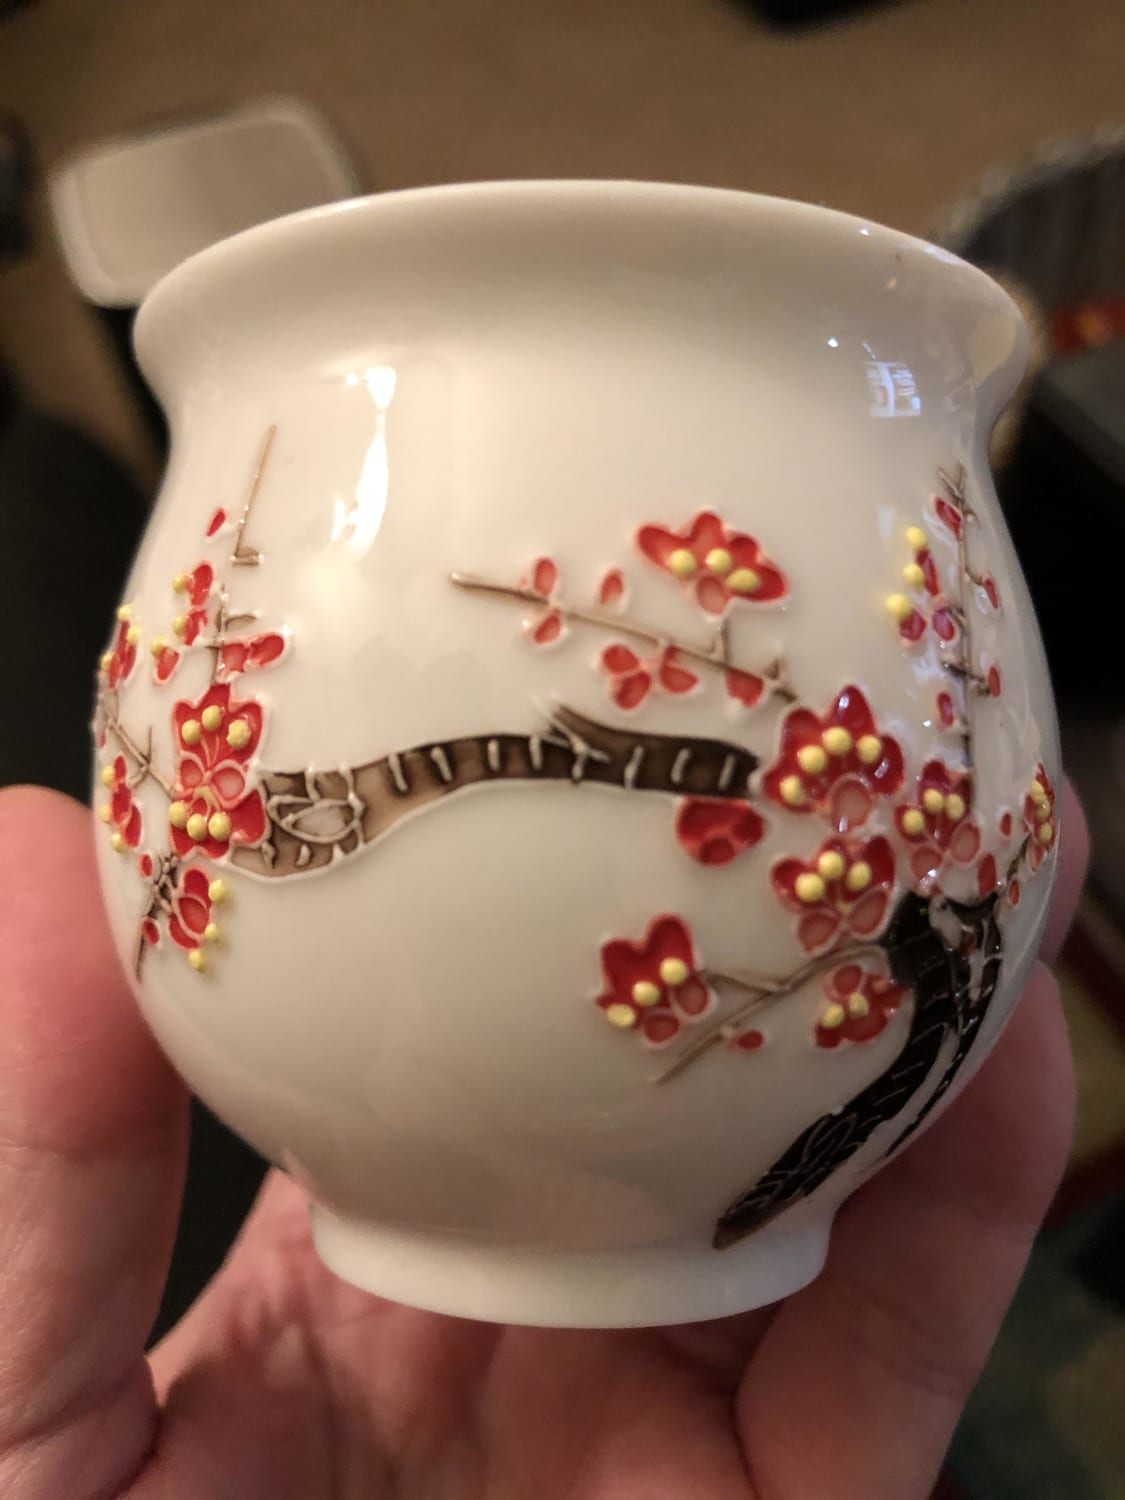 My friend recently broke his teacup and I wanted to help him out by trying to find the same one for him (the company name is Jingdezhen and the flowers on it are plum blossoms)